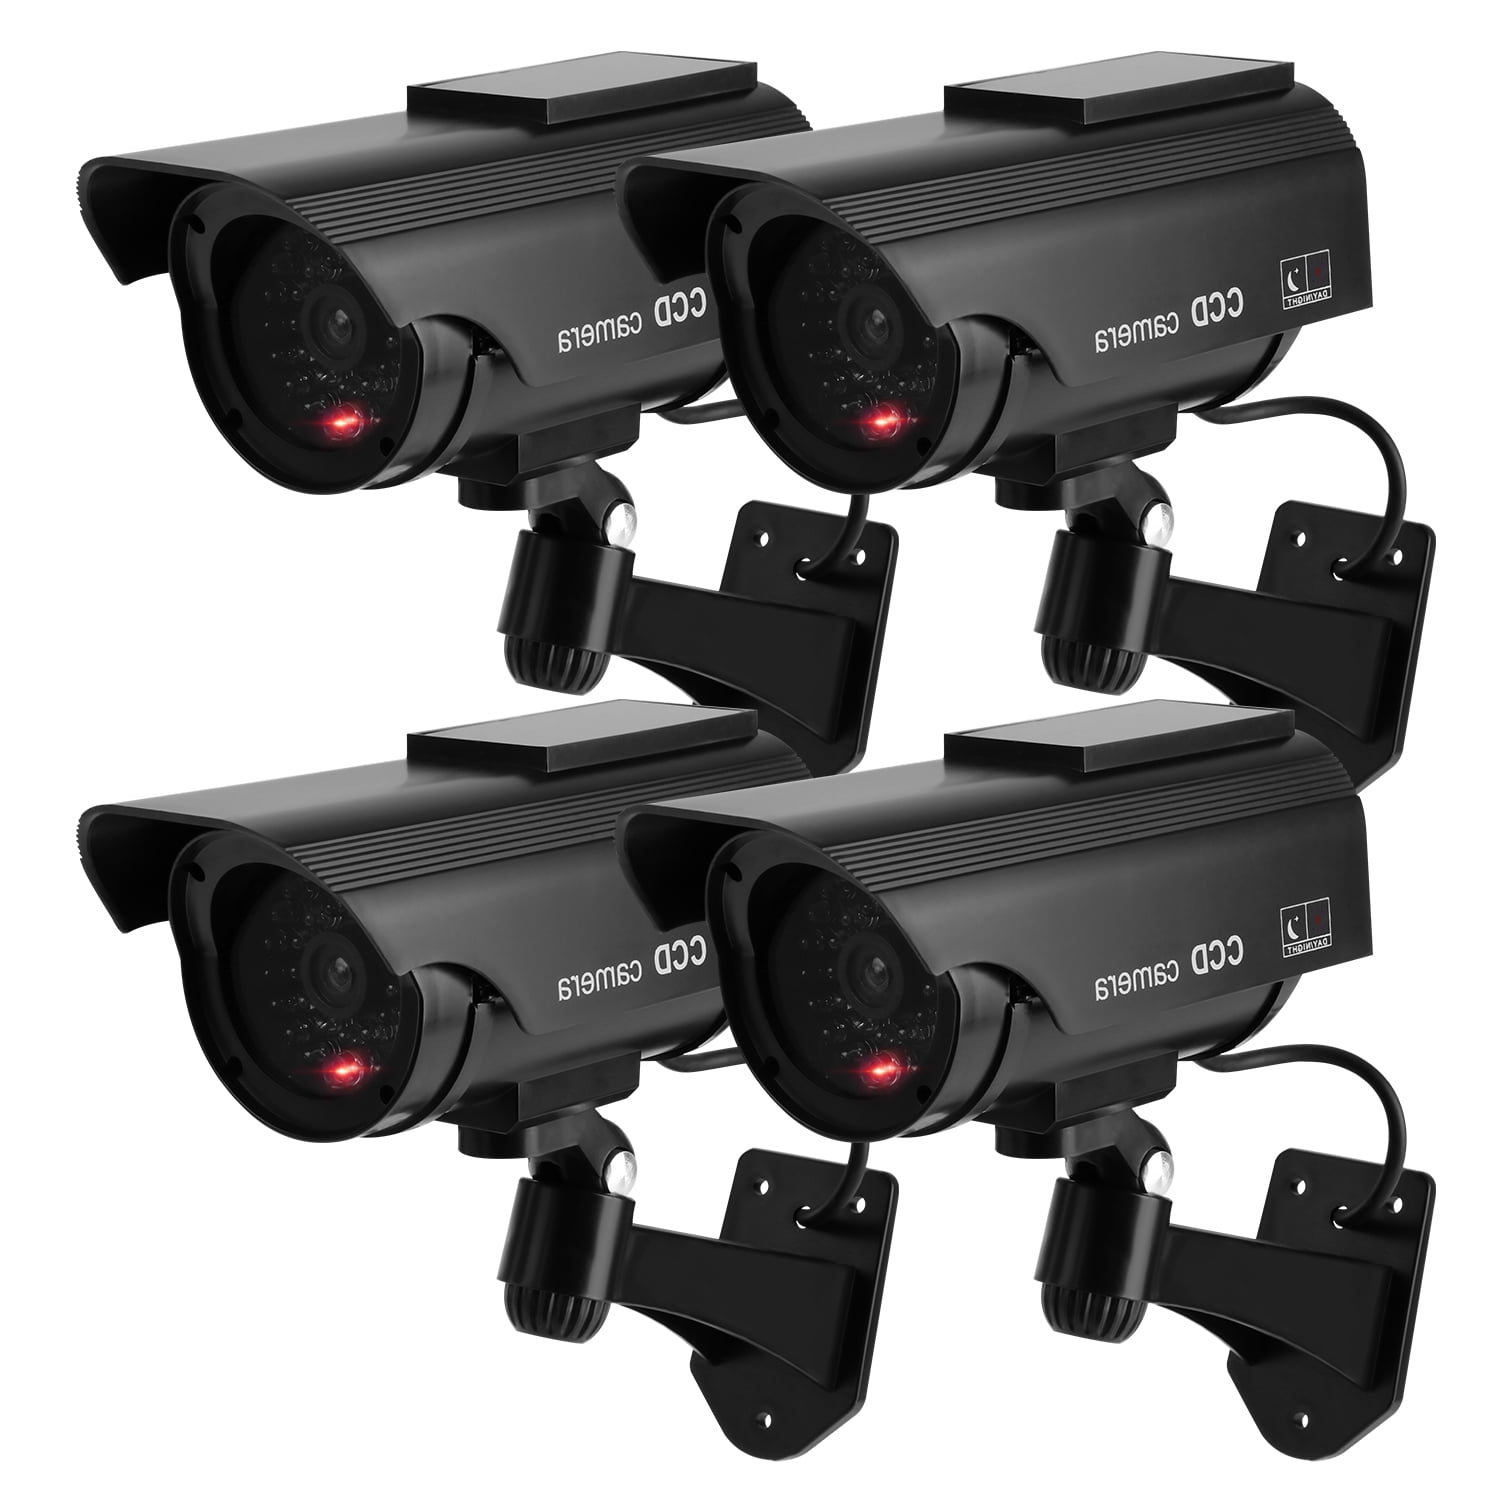 Red LED Light 2 x Dummy Security Cameras SOLAR POWERED Black 